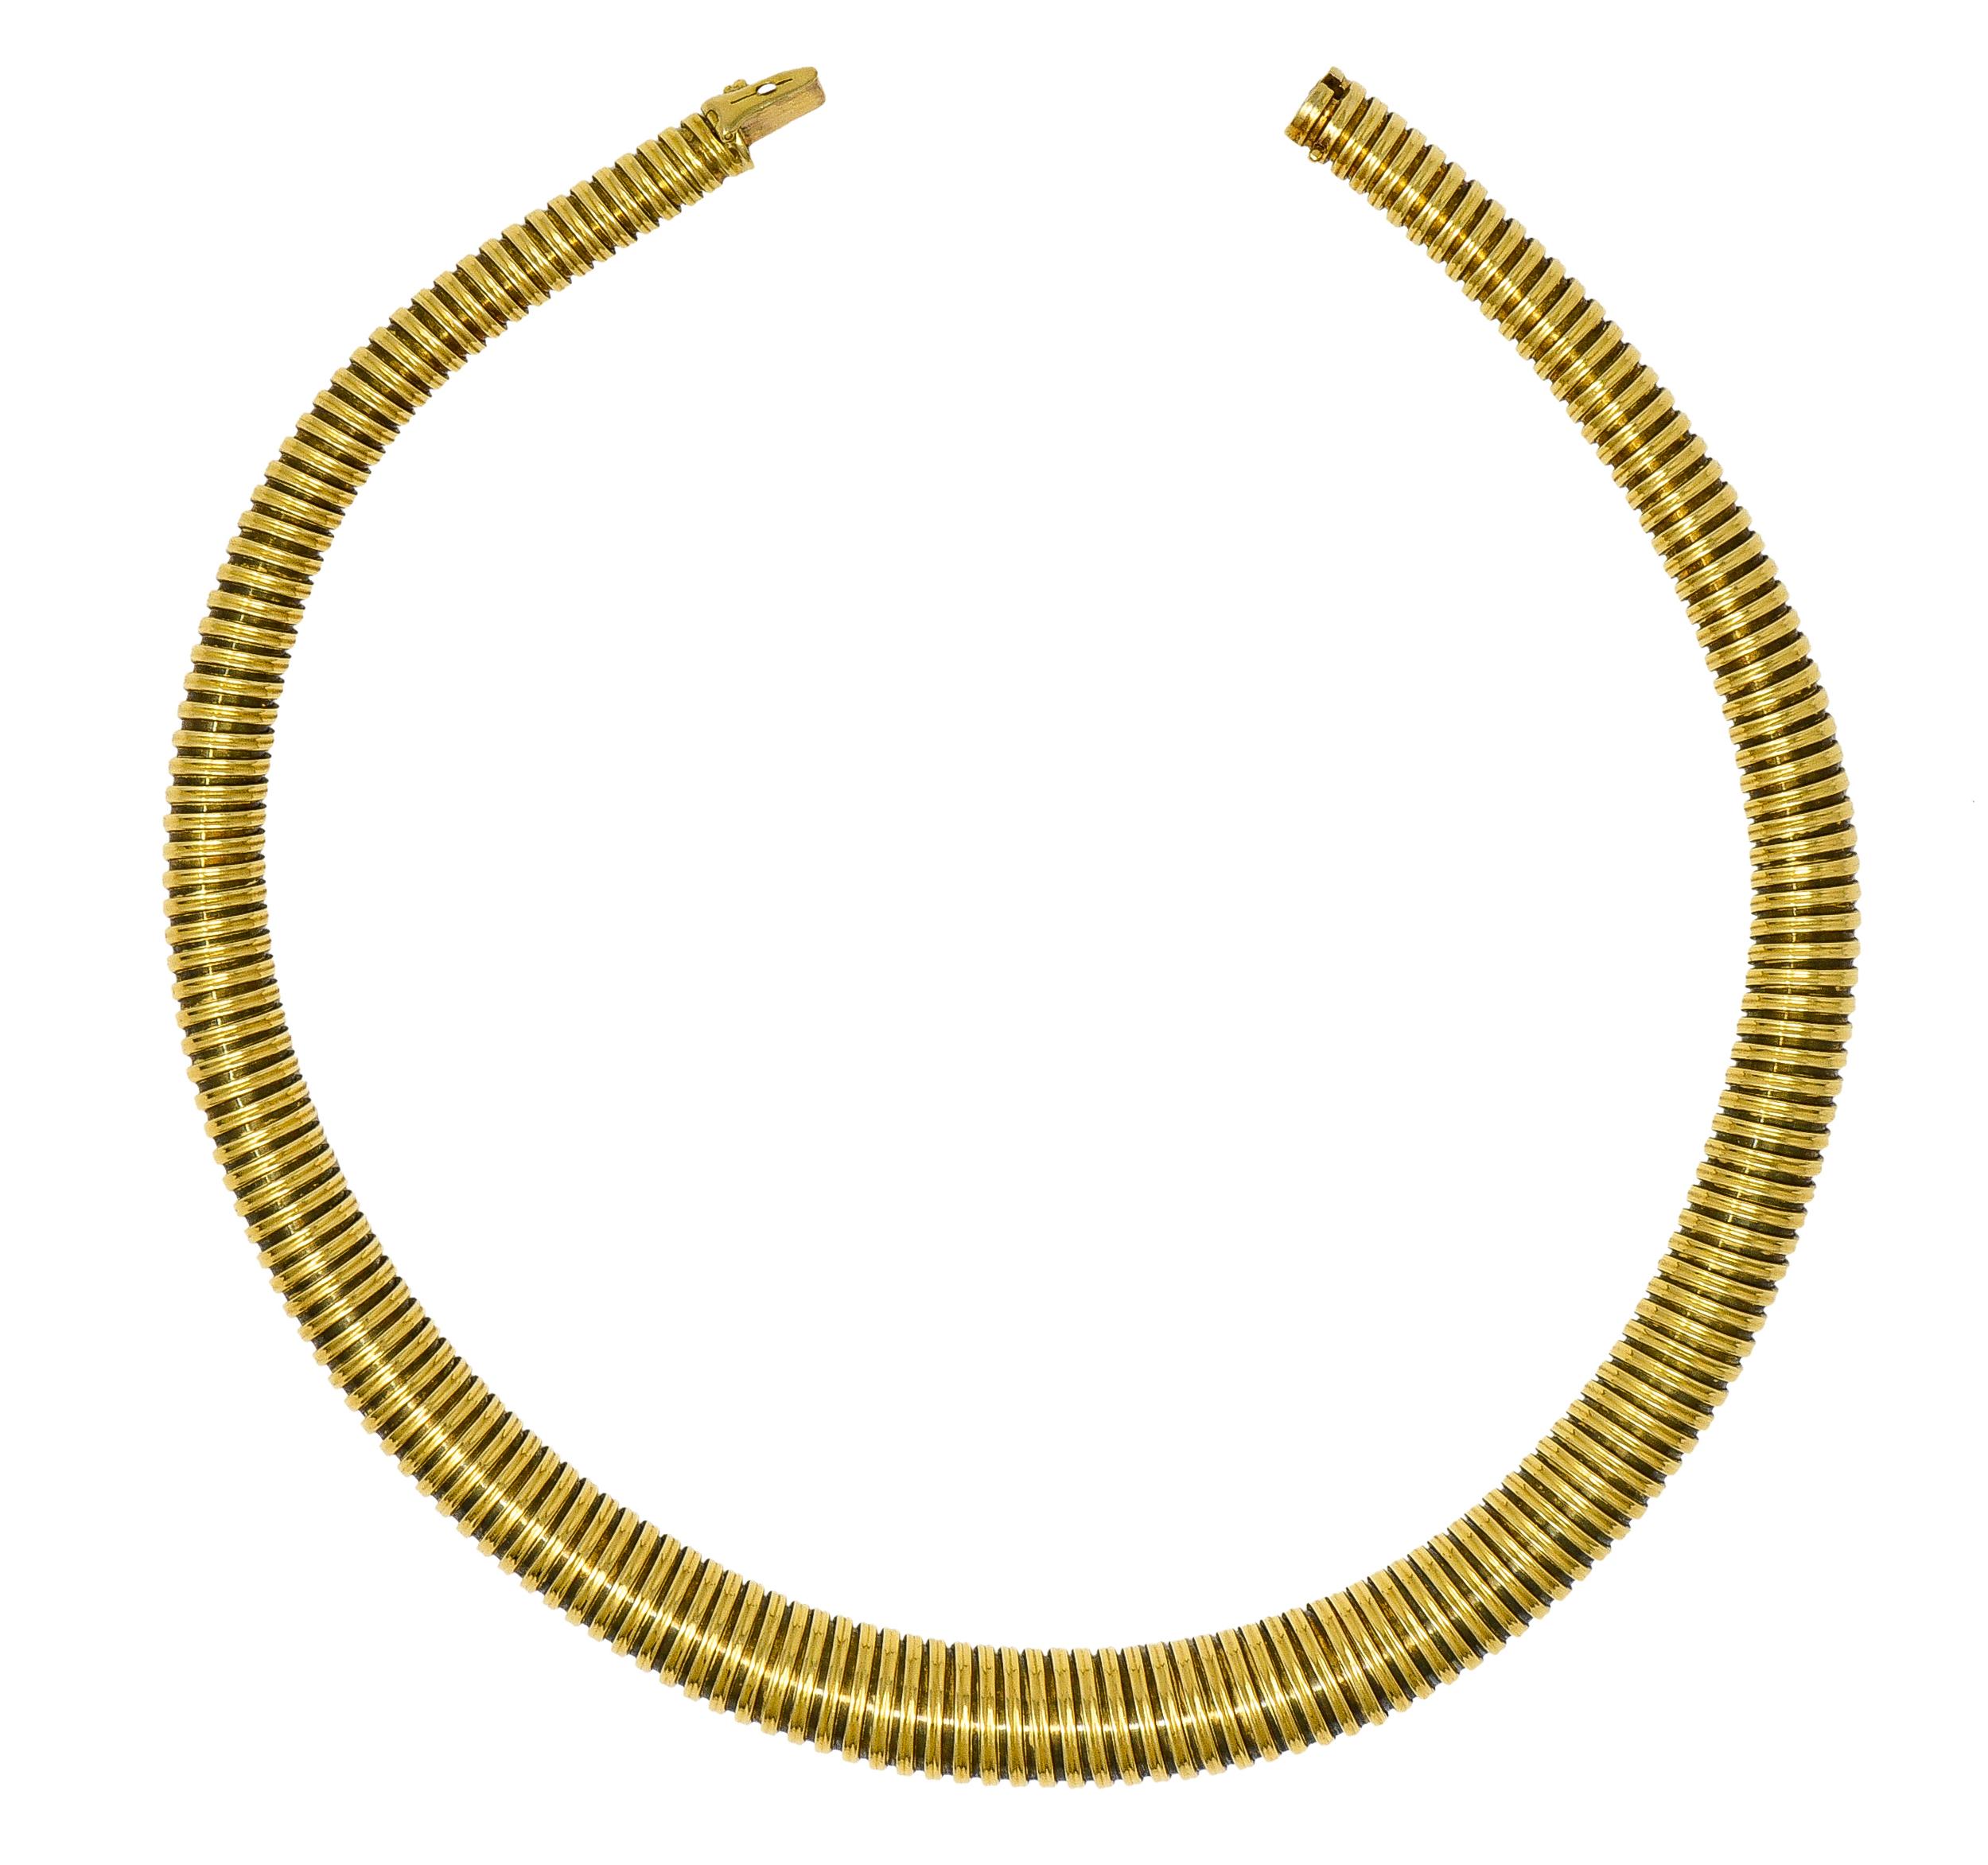 Designed as a round segmented tubogas chain. Segments graduate in size. With considerable flex. Completed by hidden clasp with hinged safety. Tested as 18 karat gold. With French Assay marks for gold import. Circa: 1970's. Width at widest: 1/2 inch.